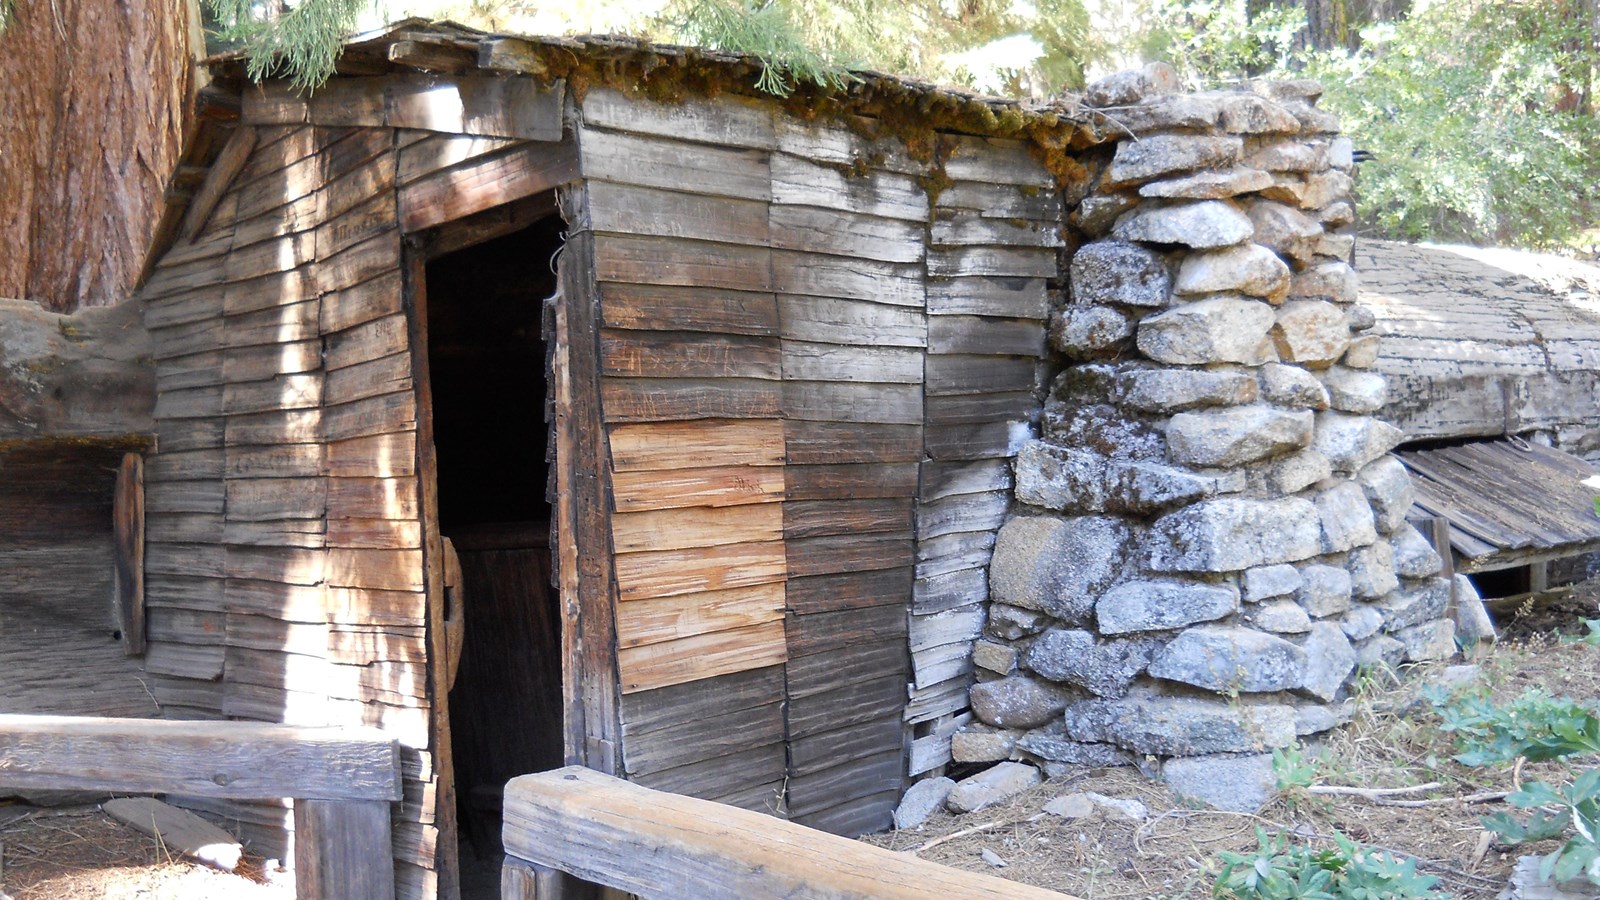 A cabin with a stone chimney is built into a downed, giant sequoia log.